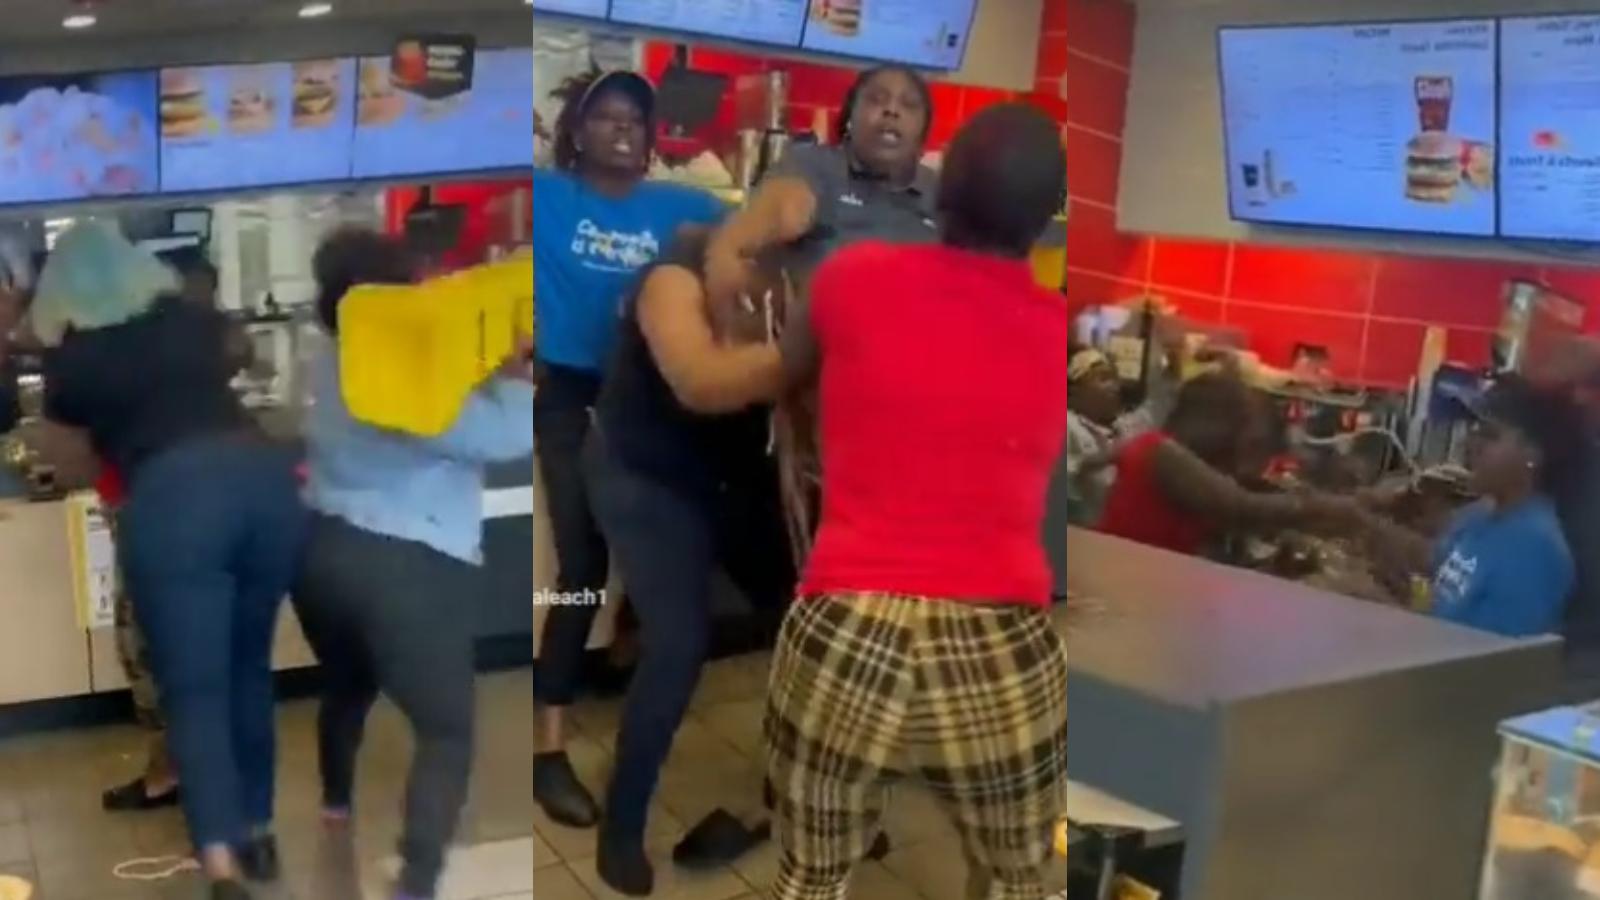 Mcdonald's employees fight with customers over sauce